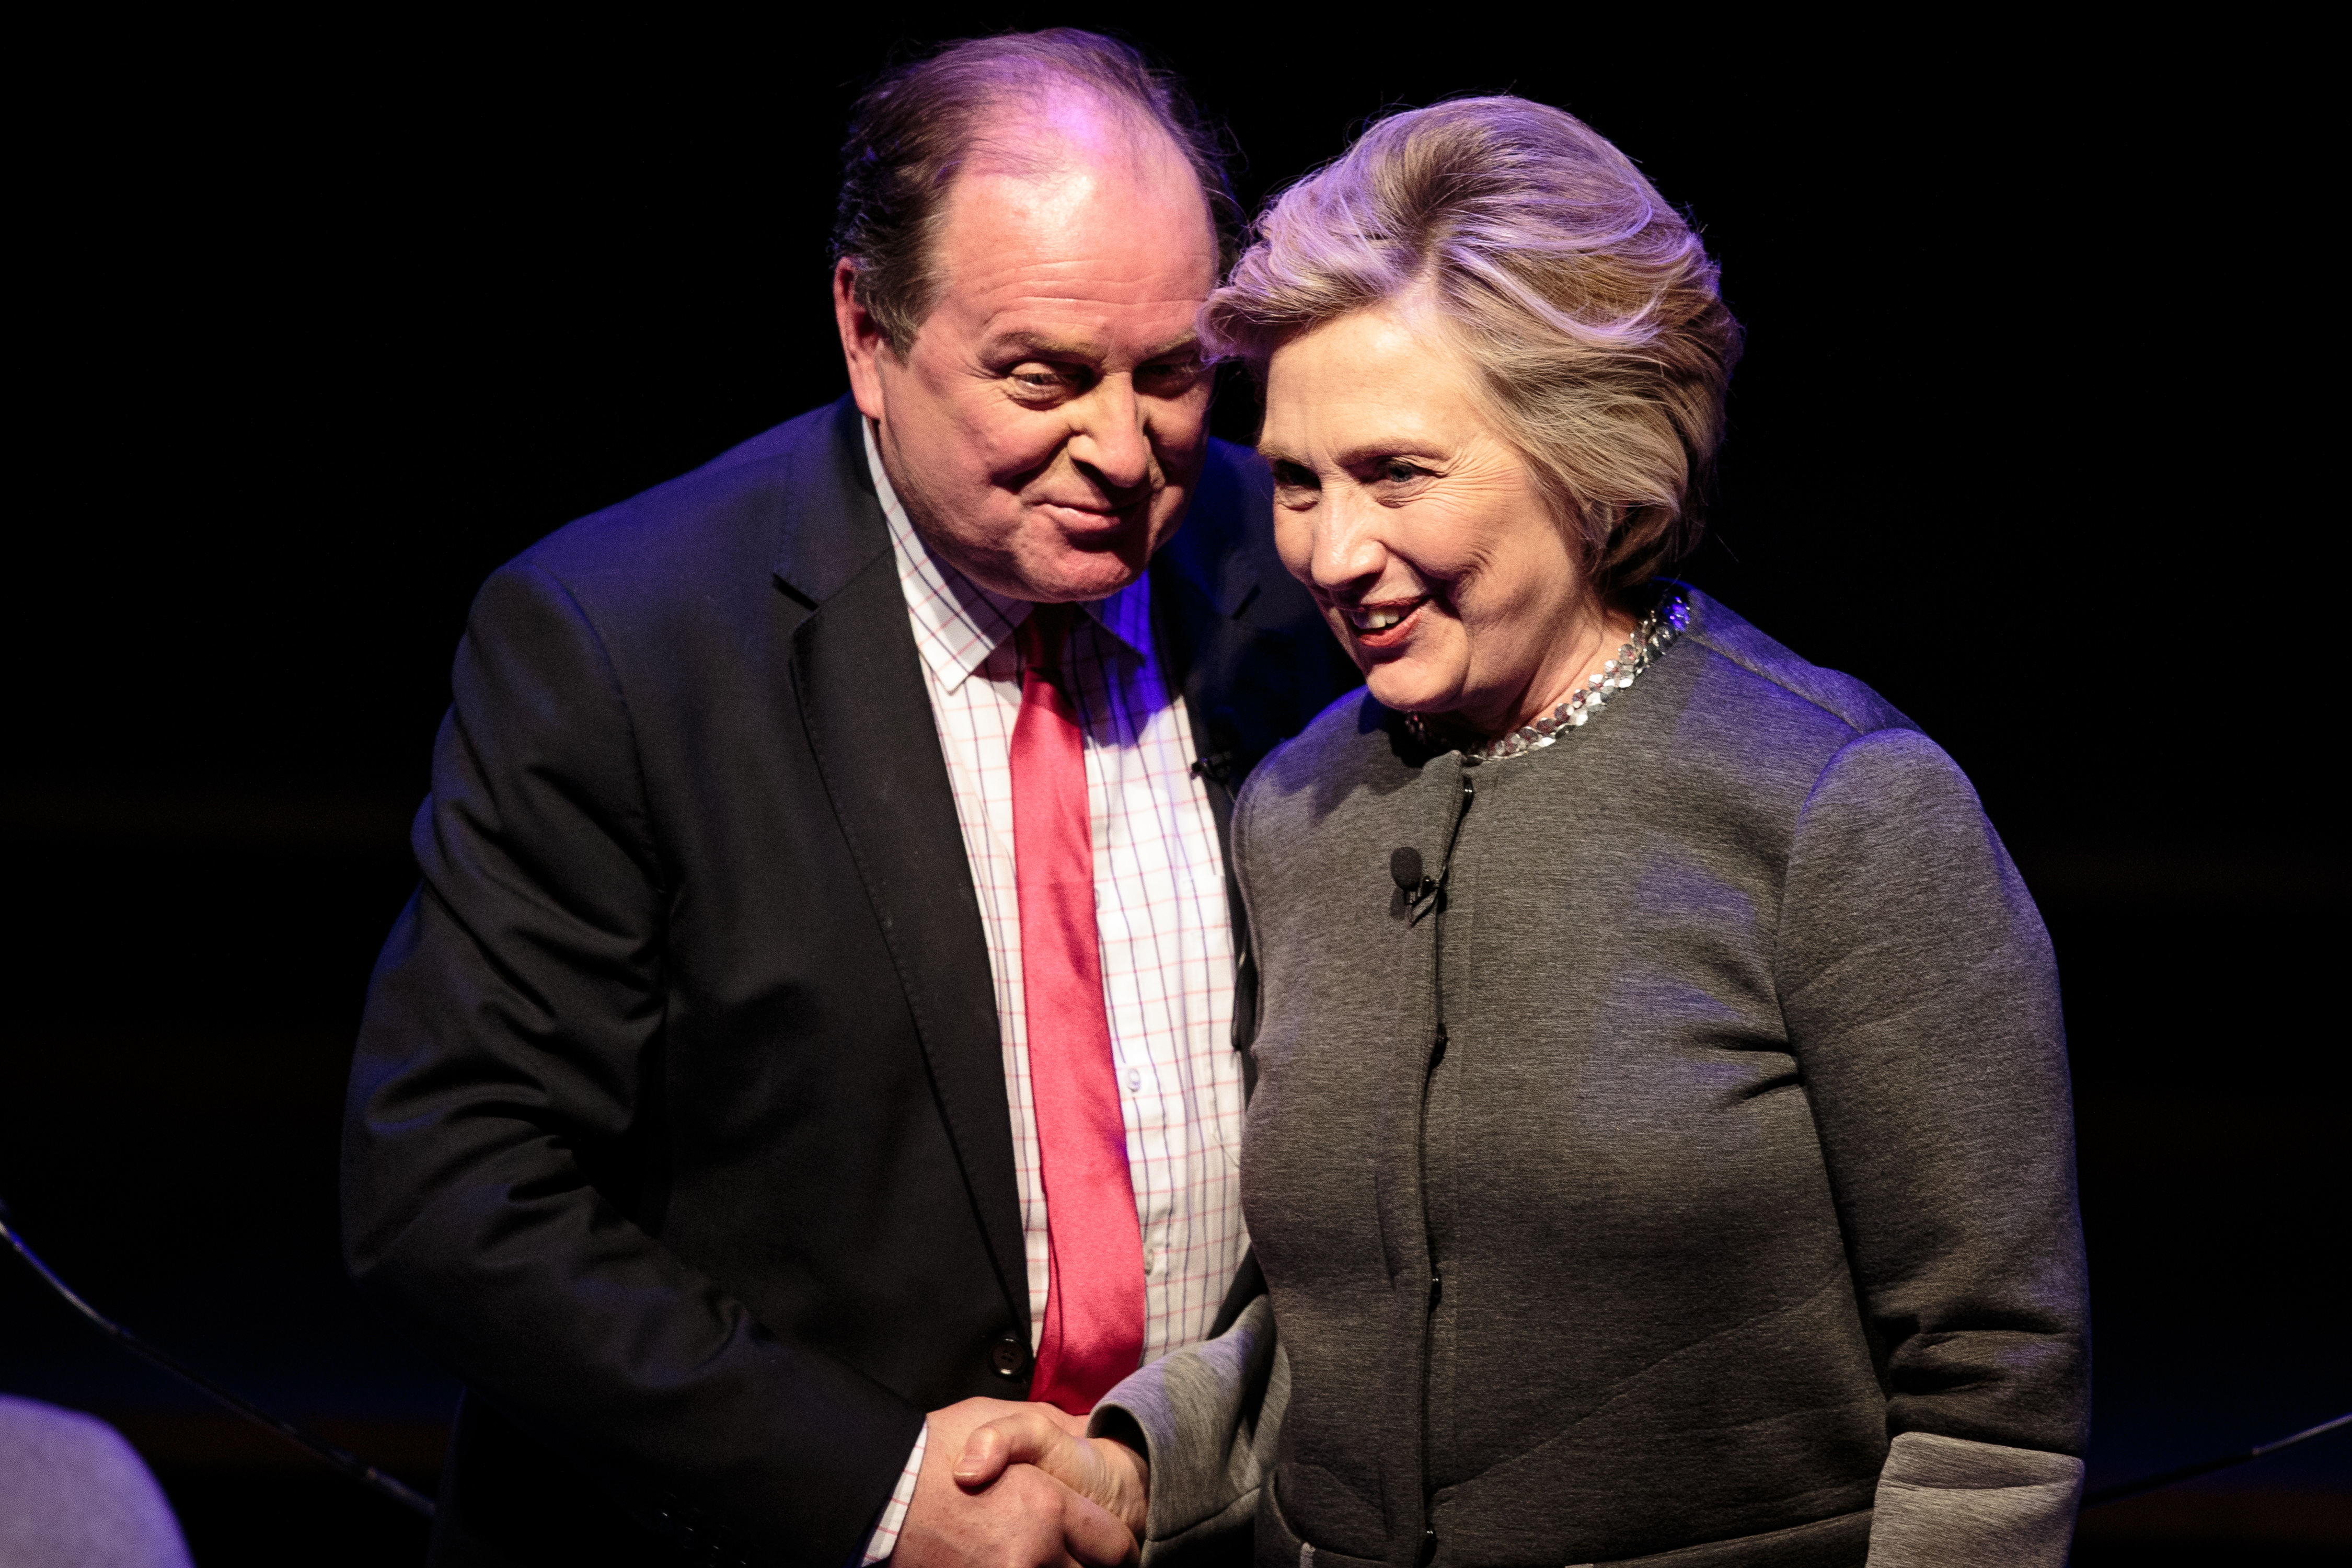 Hilary Clinton (R) shakes hands with broadcaster James Naughtie (L) following her talk at the London Literary Festival at The Royal Festival Hall on October 15, 2017 in London, England. (Jack Taylor—Getty Images)